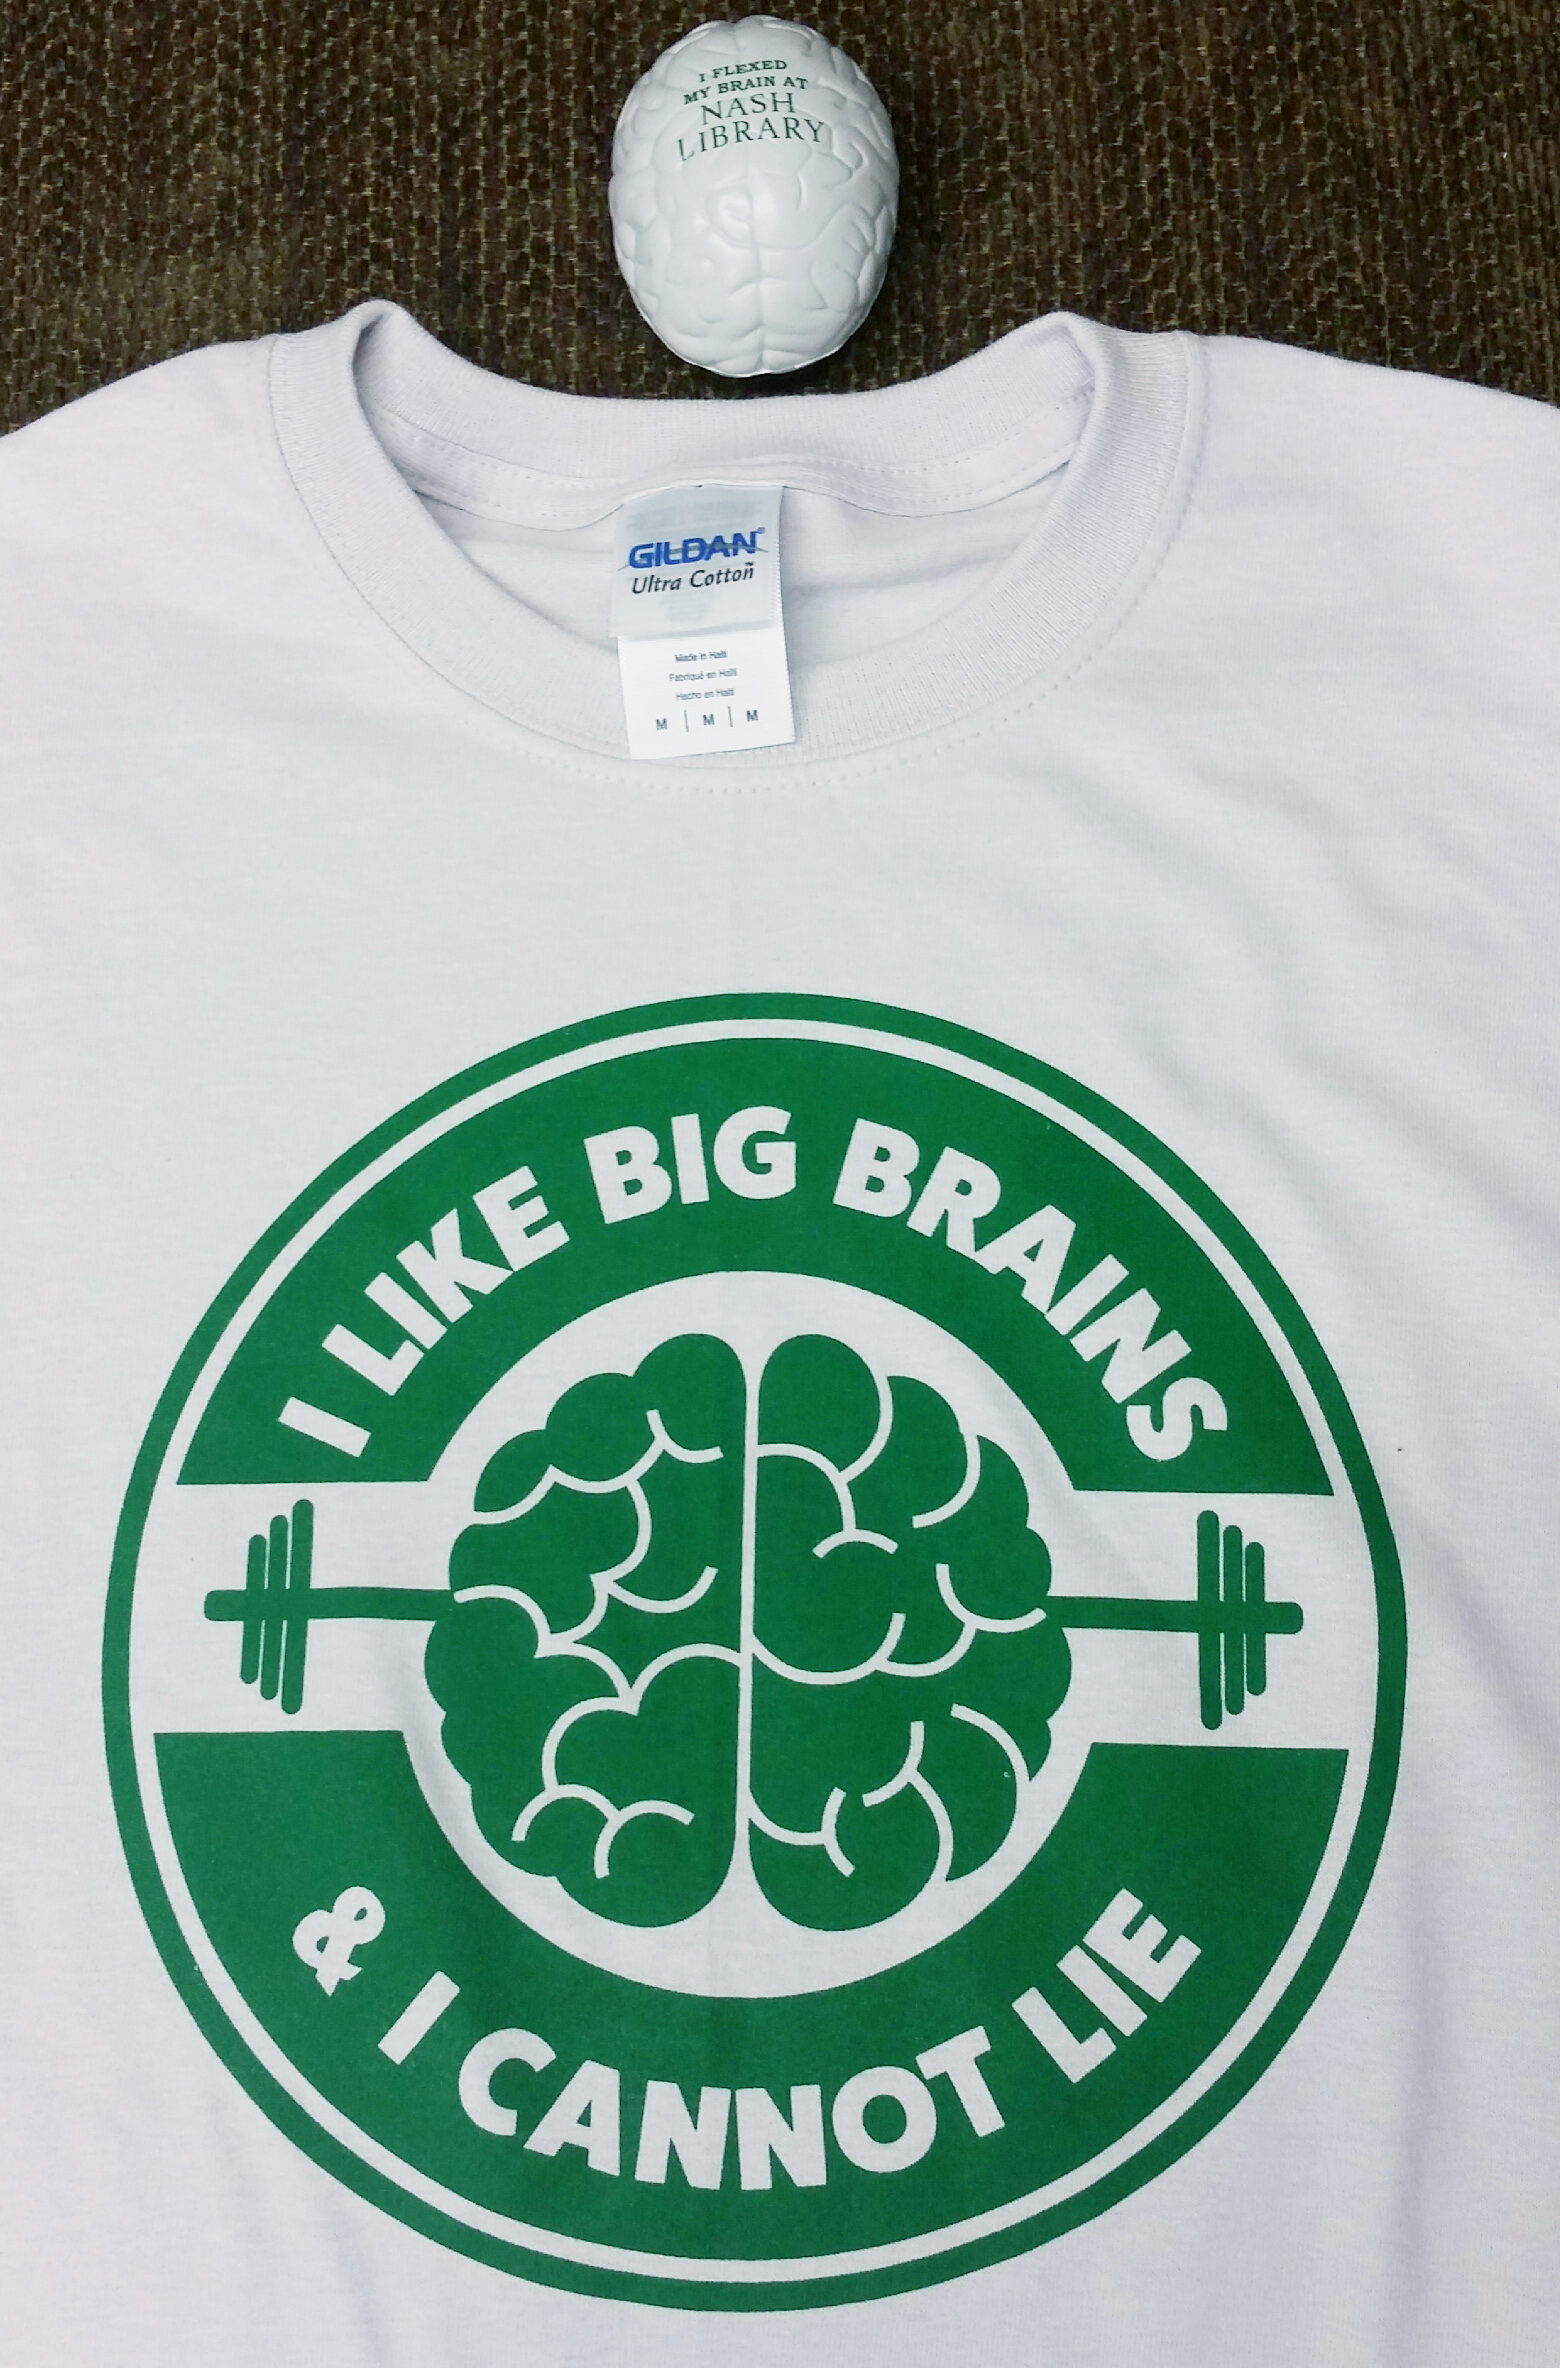 gray t-shirt with green screen printed logo showing a weightlifting brain with text saying I like big brains and I cannot lie. Above the t-shirt, there is a gray squeeze ball shaped like a brain with printed green text on it that says I flexed my brain at Nash Library